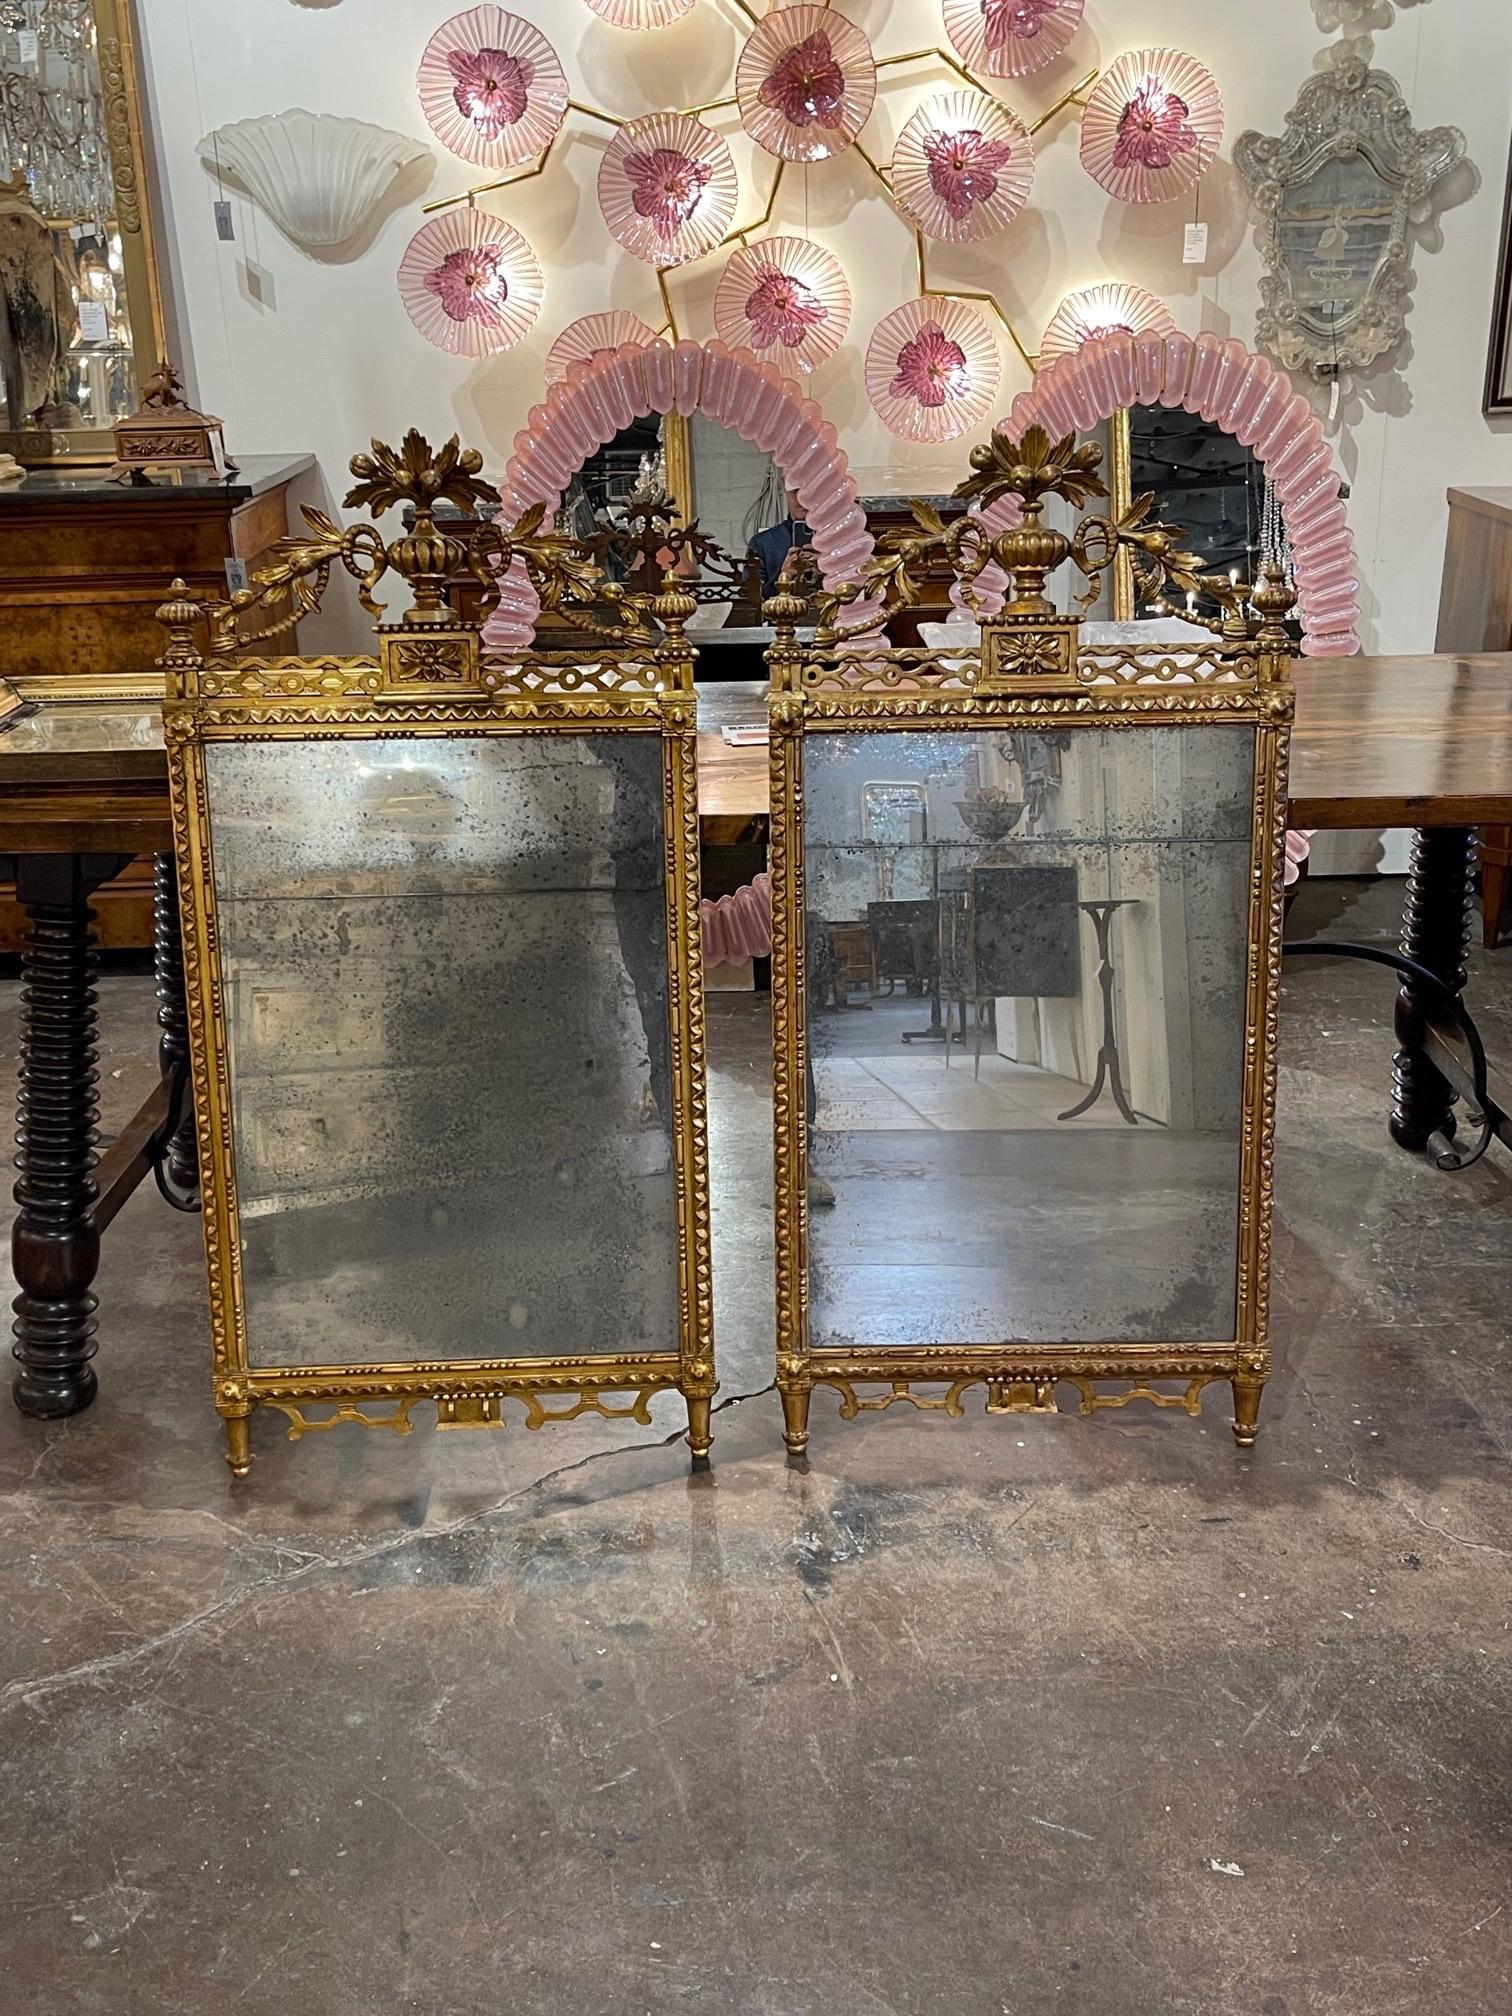 Gorgeous pair of the 19th century carved giltwood mirrors. Elaborate carvings of an urn with overflowing flowers. These mirrors are truly exceptional!